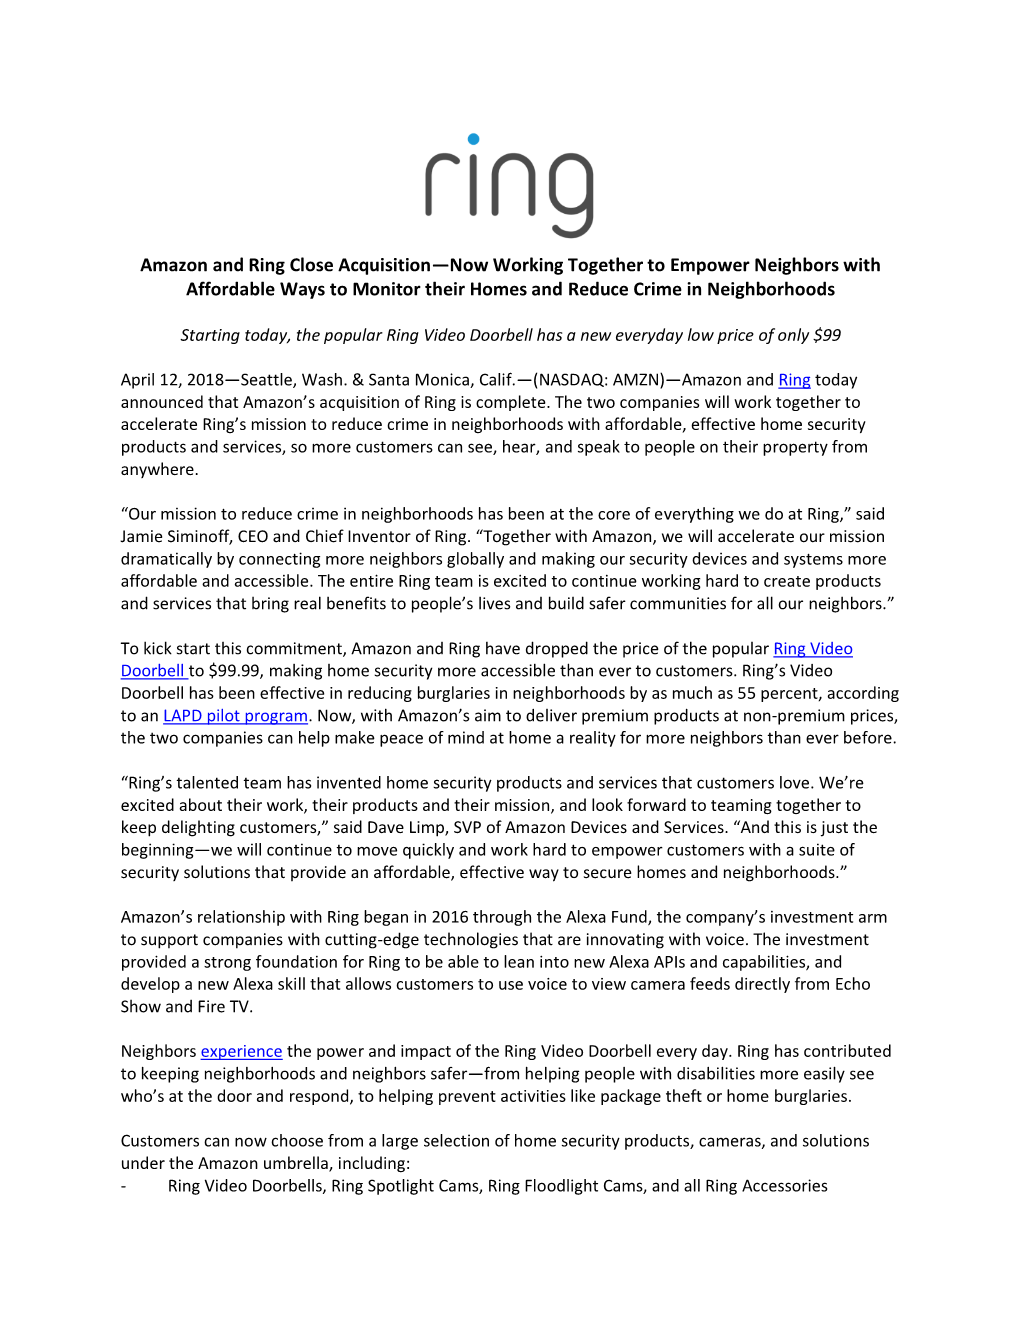 Amazon and Ring Close Acquisition—Now Working Together to Empower Neighbors with Affordable Ways to Monitor Their Homes and Reduce Crime in Neighborhoods